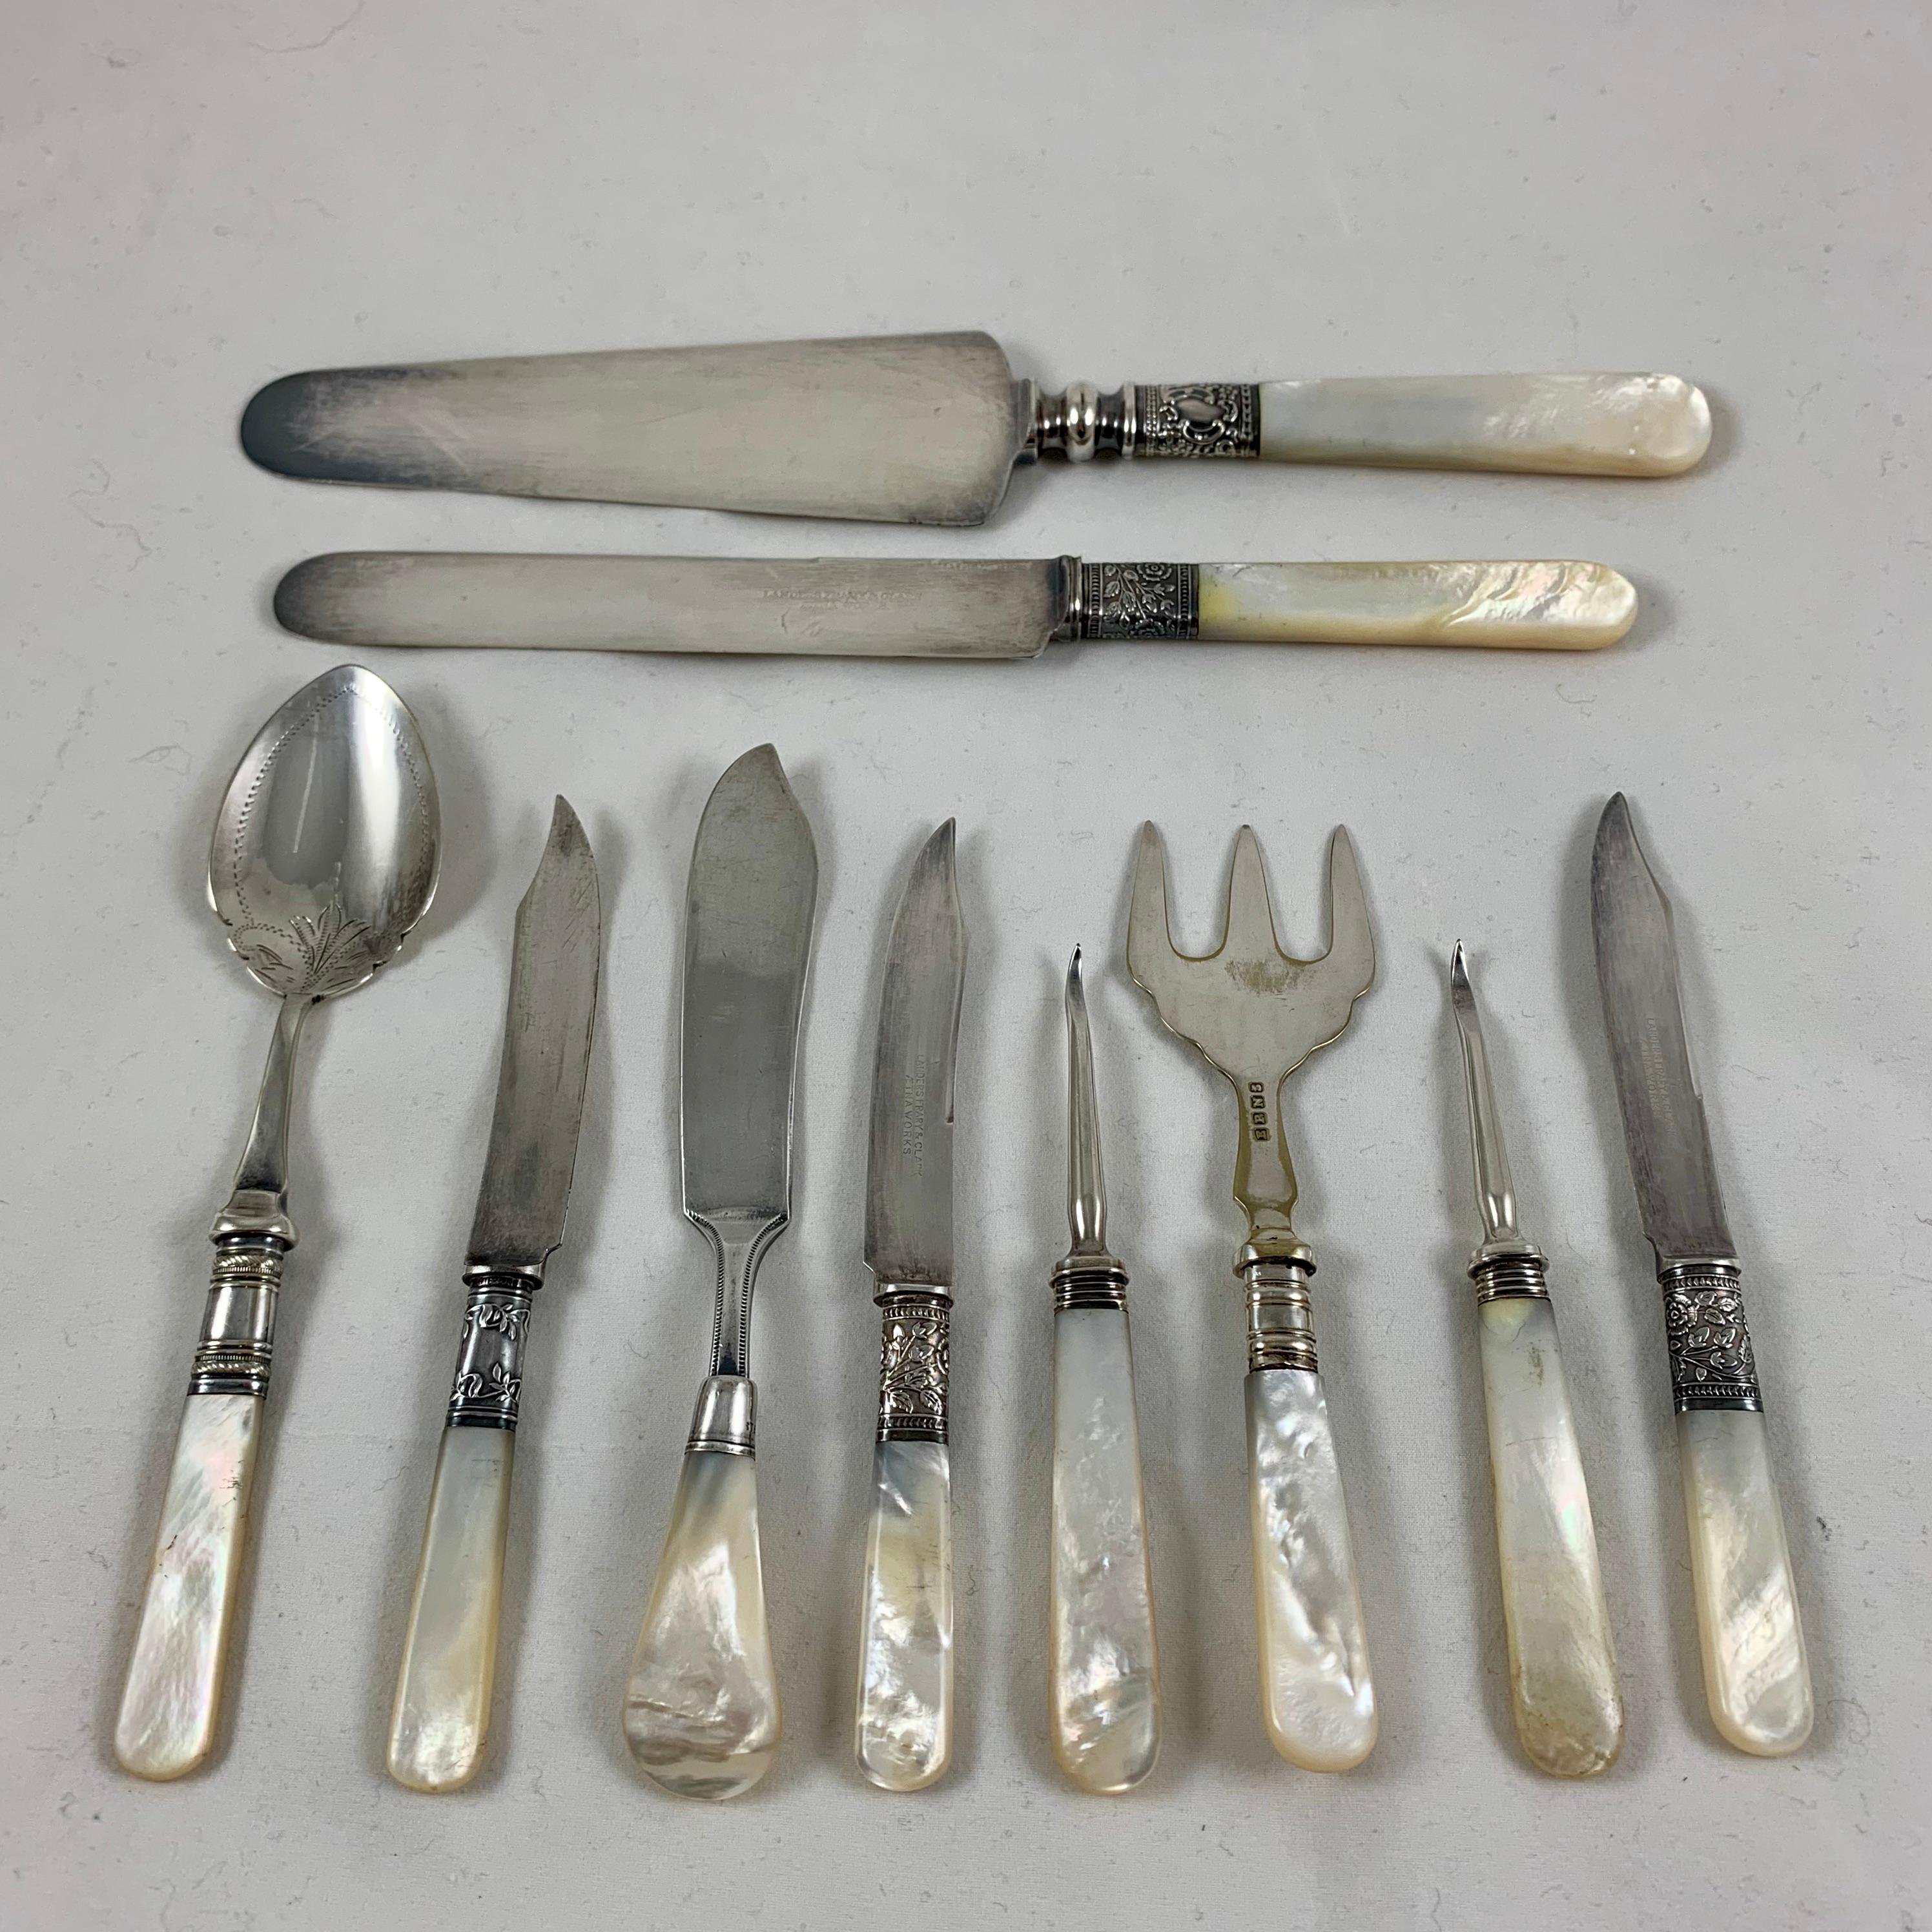 A lovely assortment of mother of pearl handled and sterling silver with EPNS silver plate servers, circa 1880-1910. The English pieces are Sheffield.

Included are:

2) English nut picks: 4.75 in. L x .50 in. W x .25 in. H

1) American pie